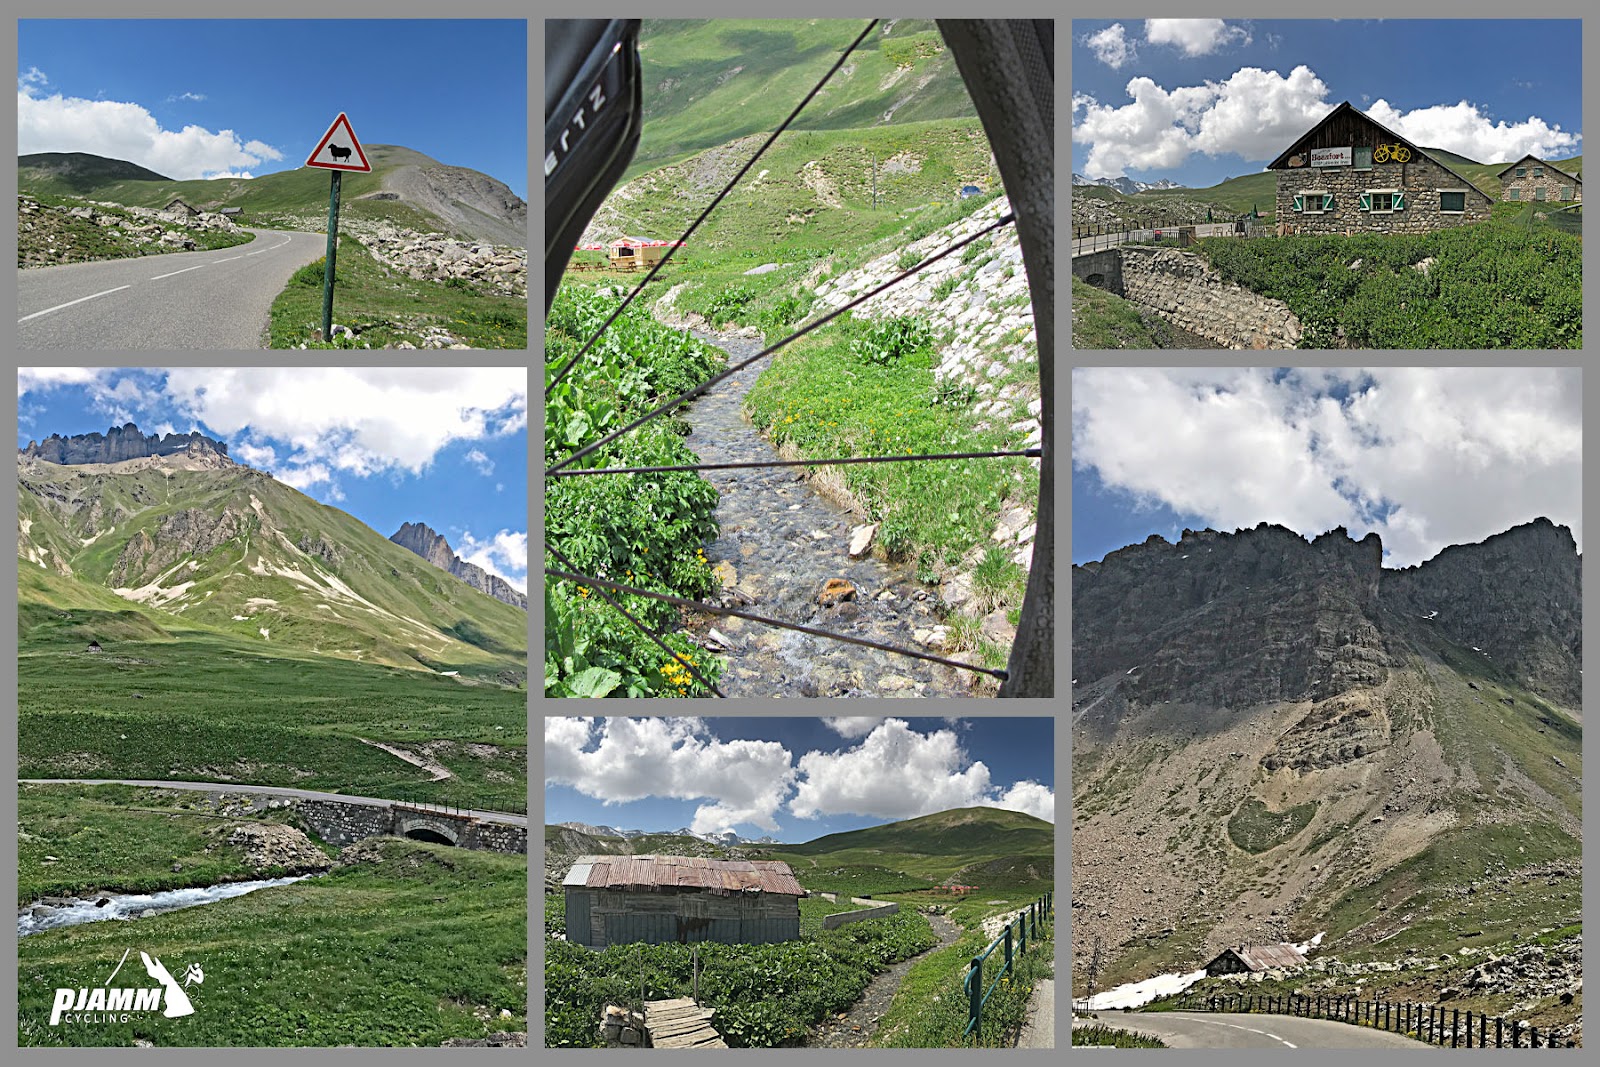 Cycling Col du Galibier from Valloire: photo collage shows views along the climb, lush green hillsides, sharp French Alps mountains, old stone farm buildings, small creeks